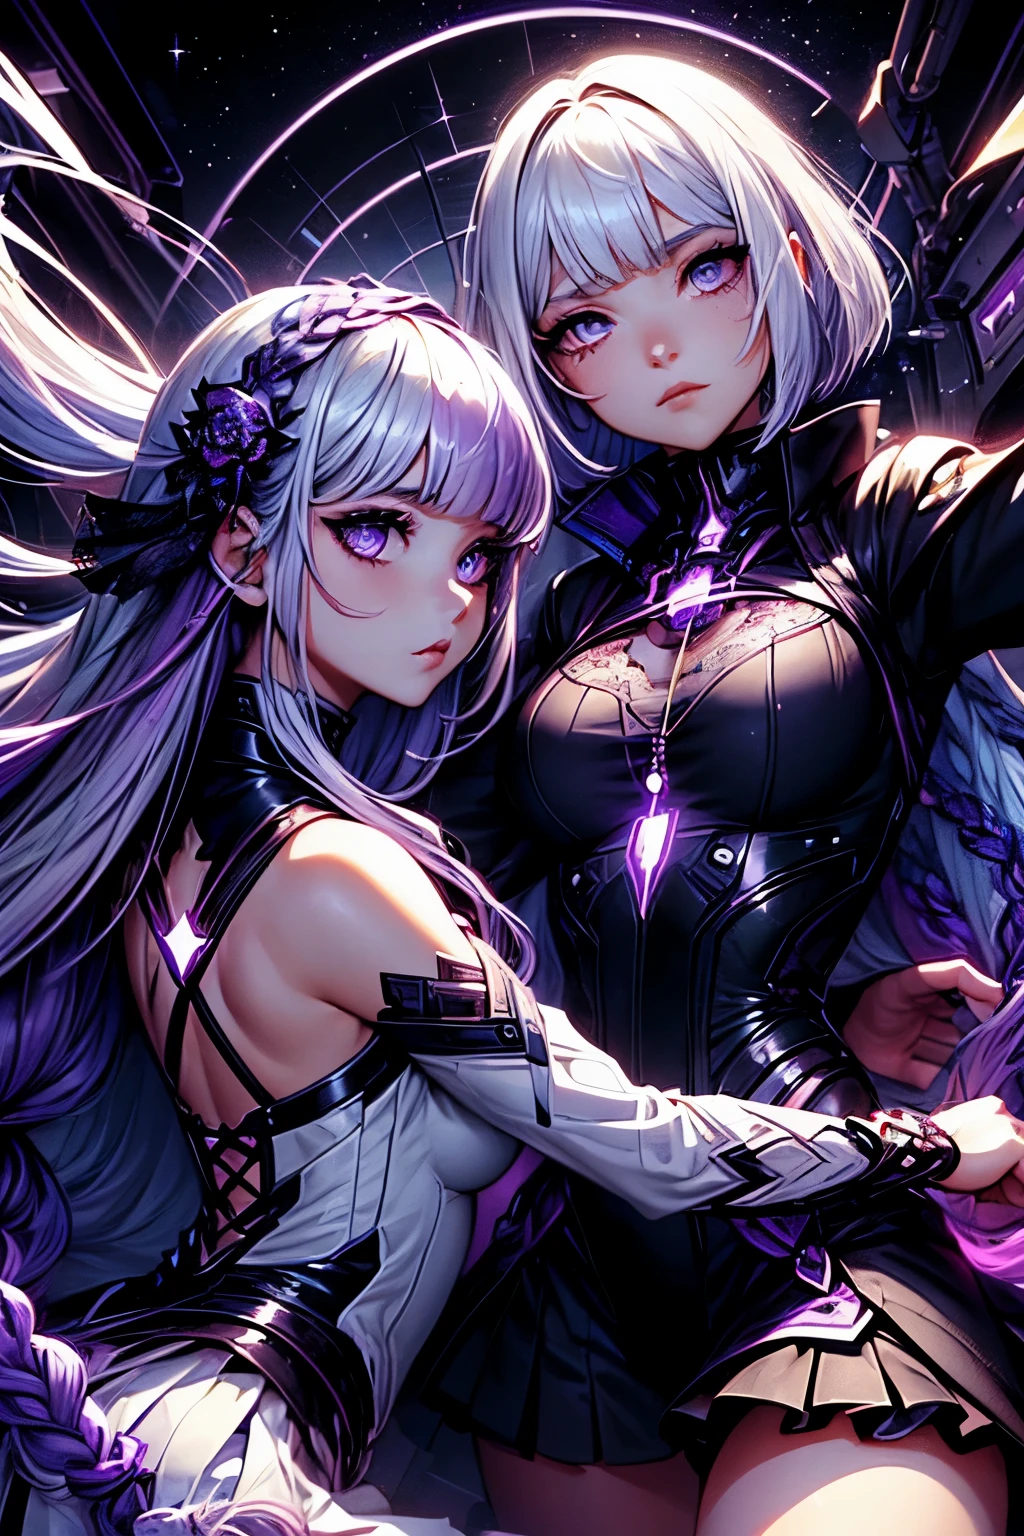 (ultra-detailed face, sleepy eyes:1.2), (2girls:1.3), (A mysterious girl and her friend are break dancing and jumping in a daring pose with their backs to each other:1.4), BREAK (Cryptic Girl has (long purple-white gradient hair), Hair braided in two large sections. She is indifferent, kind and has lavender eyes:1.3), BREAK (Cryptic Girl's friend has white hair, blunt bangs, a bob cut and lavender eyes:1.1), BREAK (The girl is wearing a lace and ruffled cape dress and mini skirt), BREAK (In the background, in space, mysterious cryptograms and a glowing key can be seen)